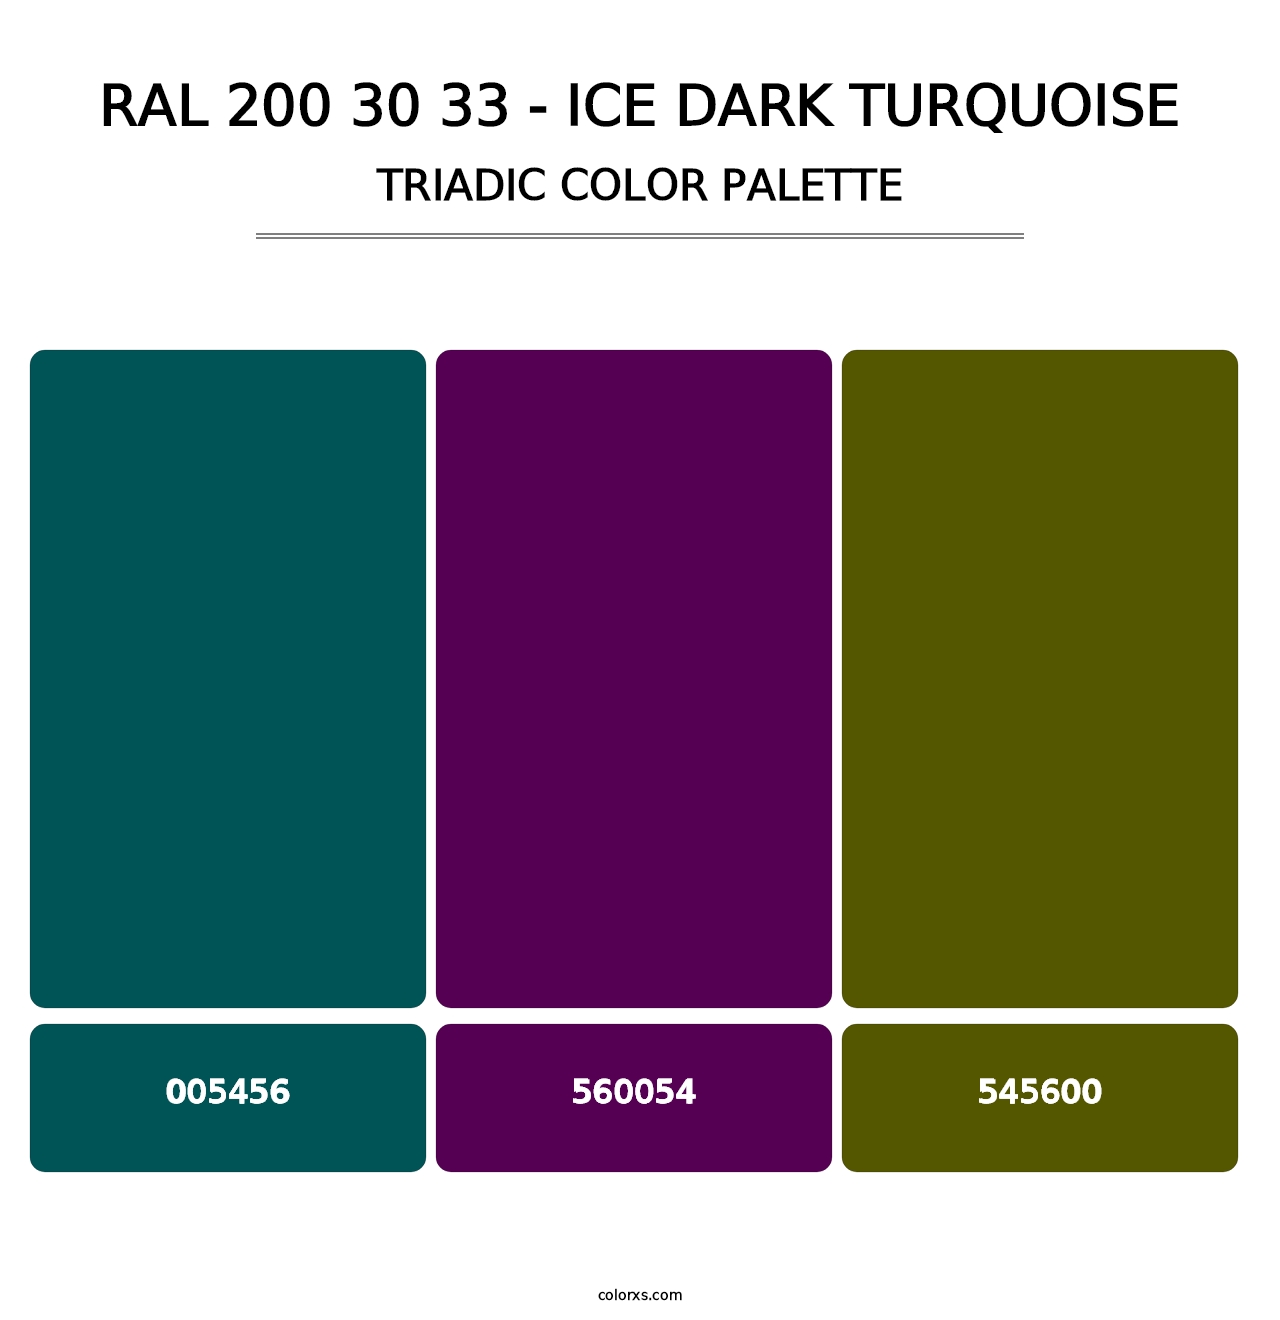 RAL 200 30 33 - Ice Dark Turquoise - Triadic Color Palette